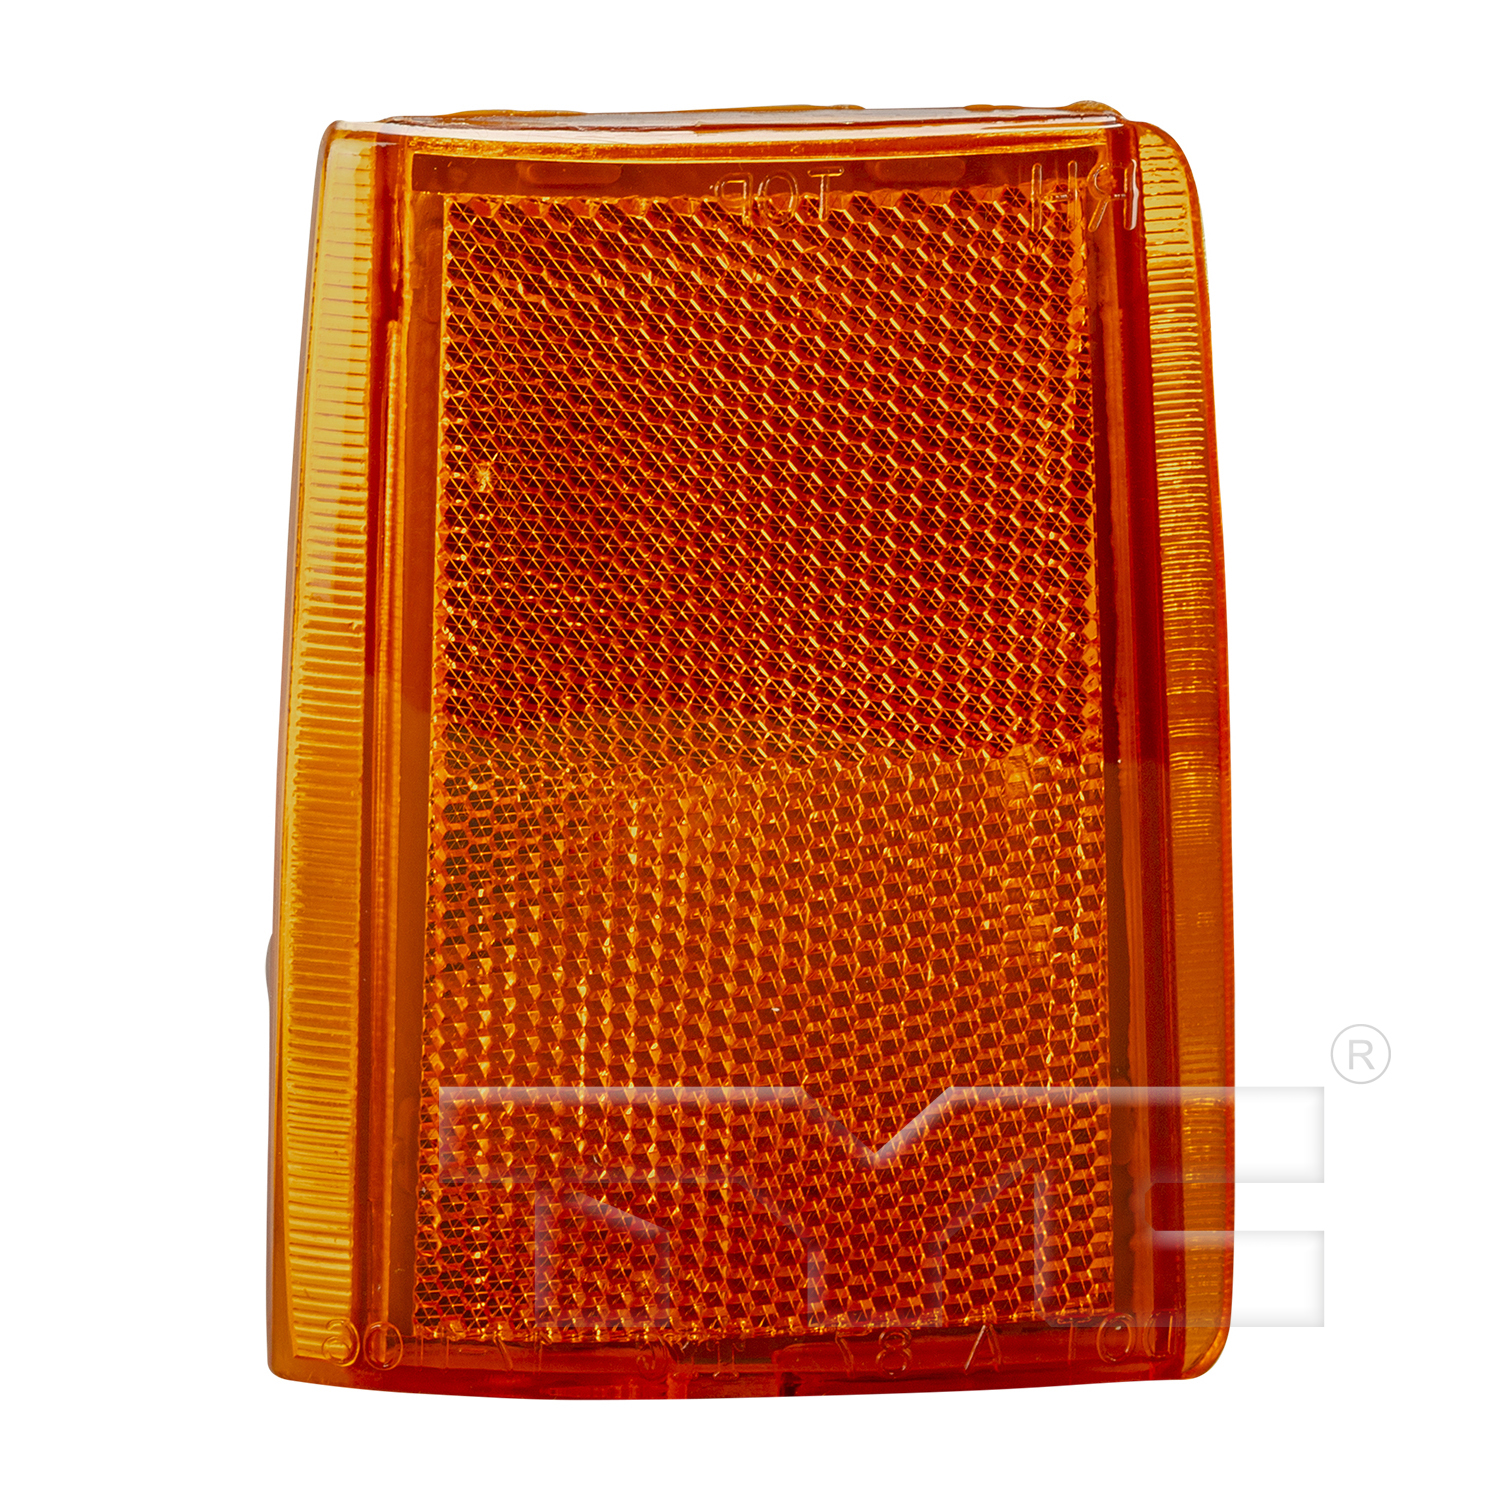 Aftermarket LAMPS for CHEVROLET - C2500 SUBURBAN, C2500 SUBURBAN,92-93,LT Front side reflector